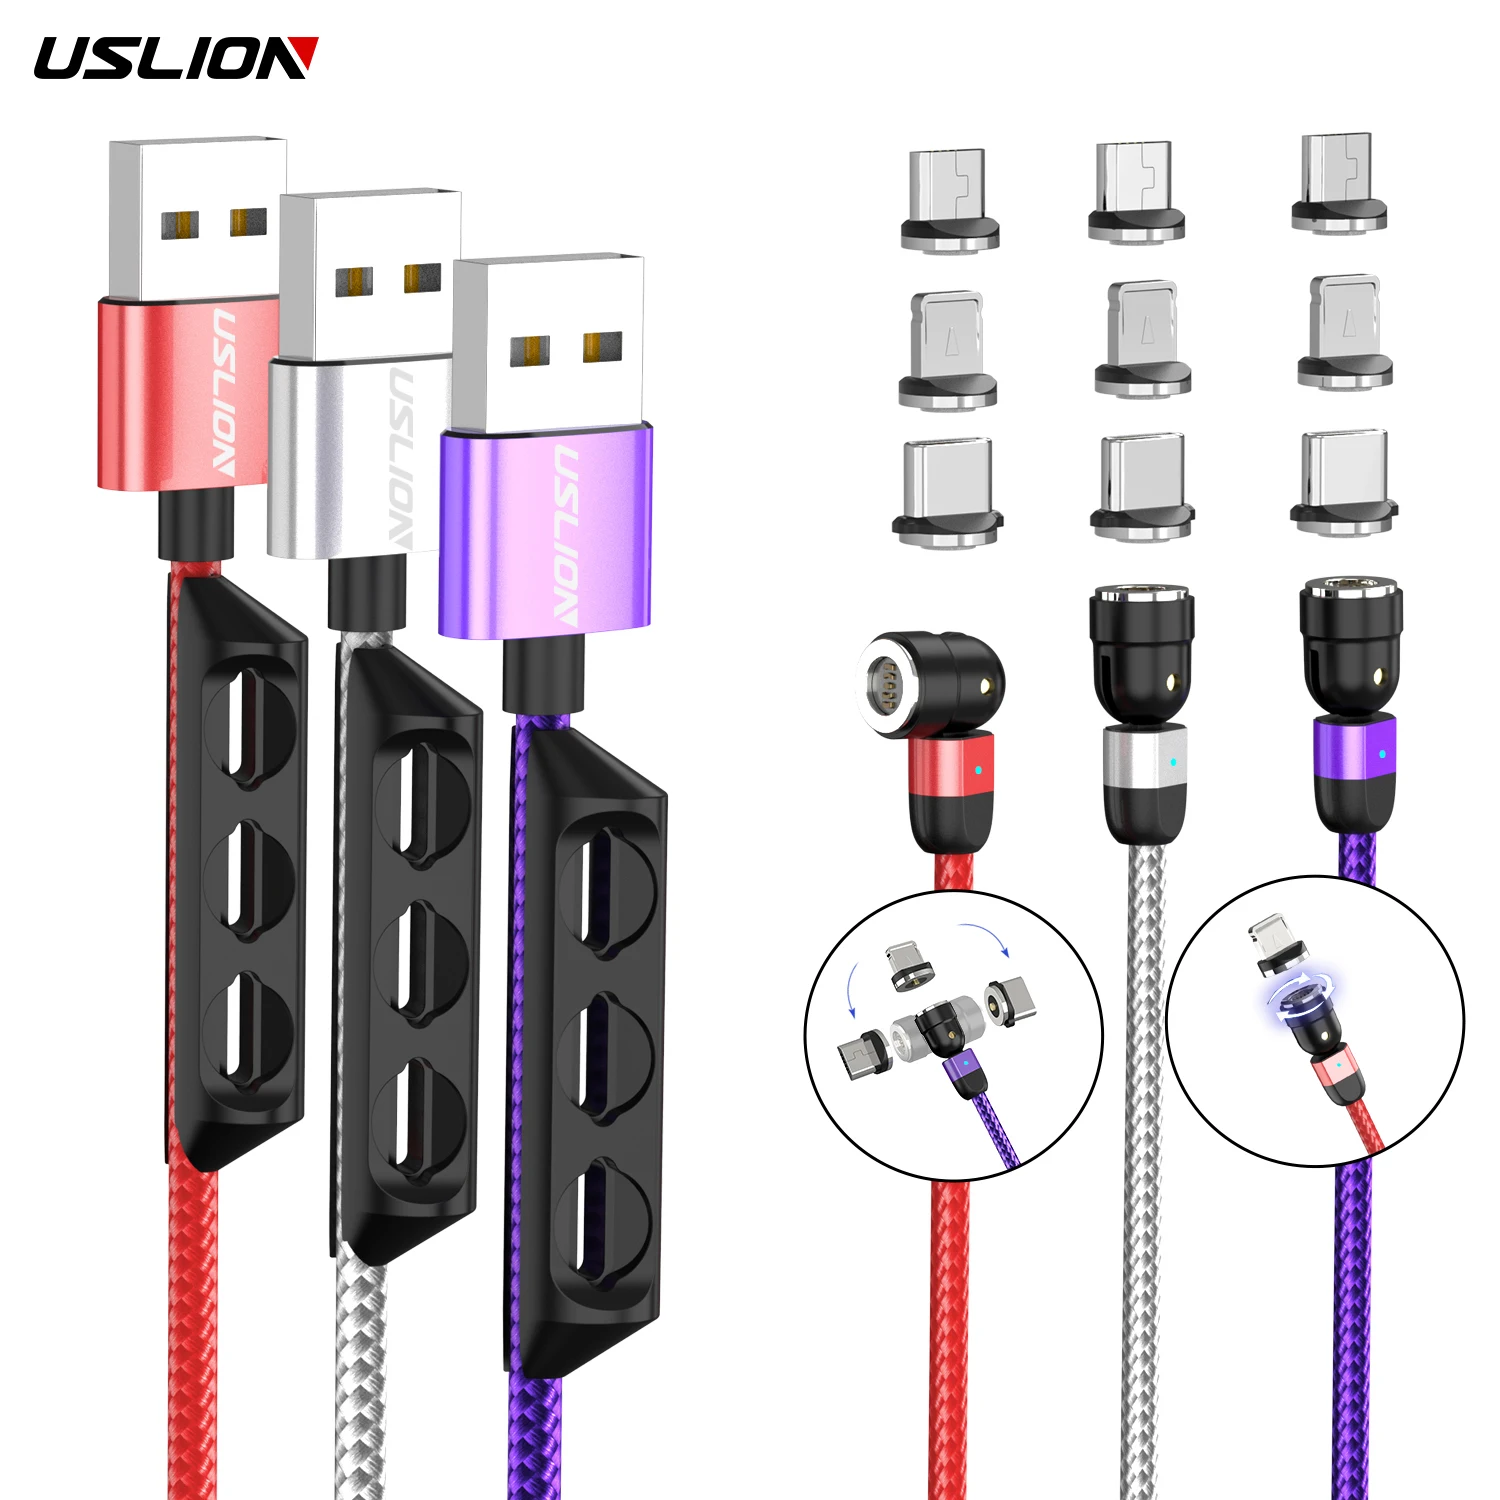 

USLION 3 in 1 USB cable 540 Degree Rotate Type c Fast Charging Magnetic USB Cable Magnetic Charger Cable Data Line, Black red purple silver